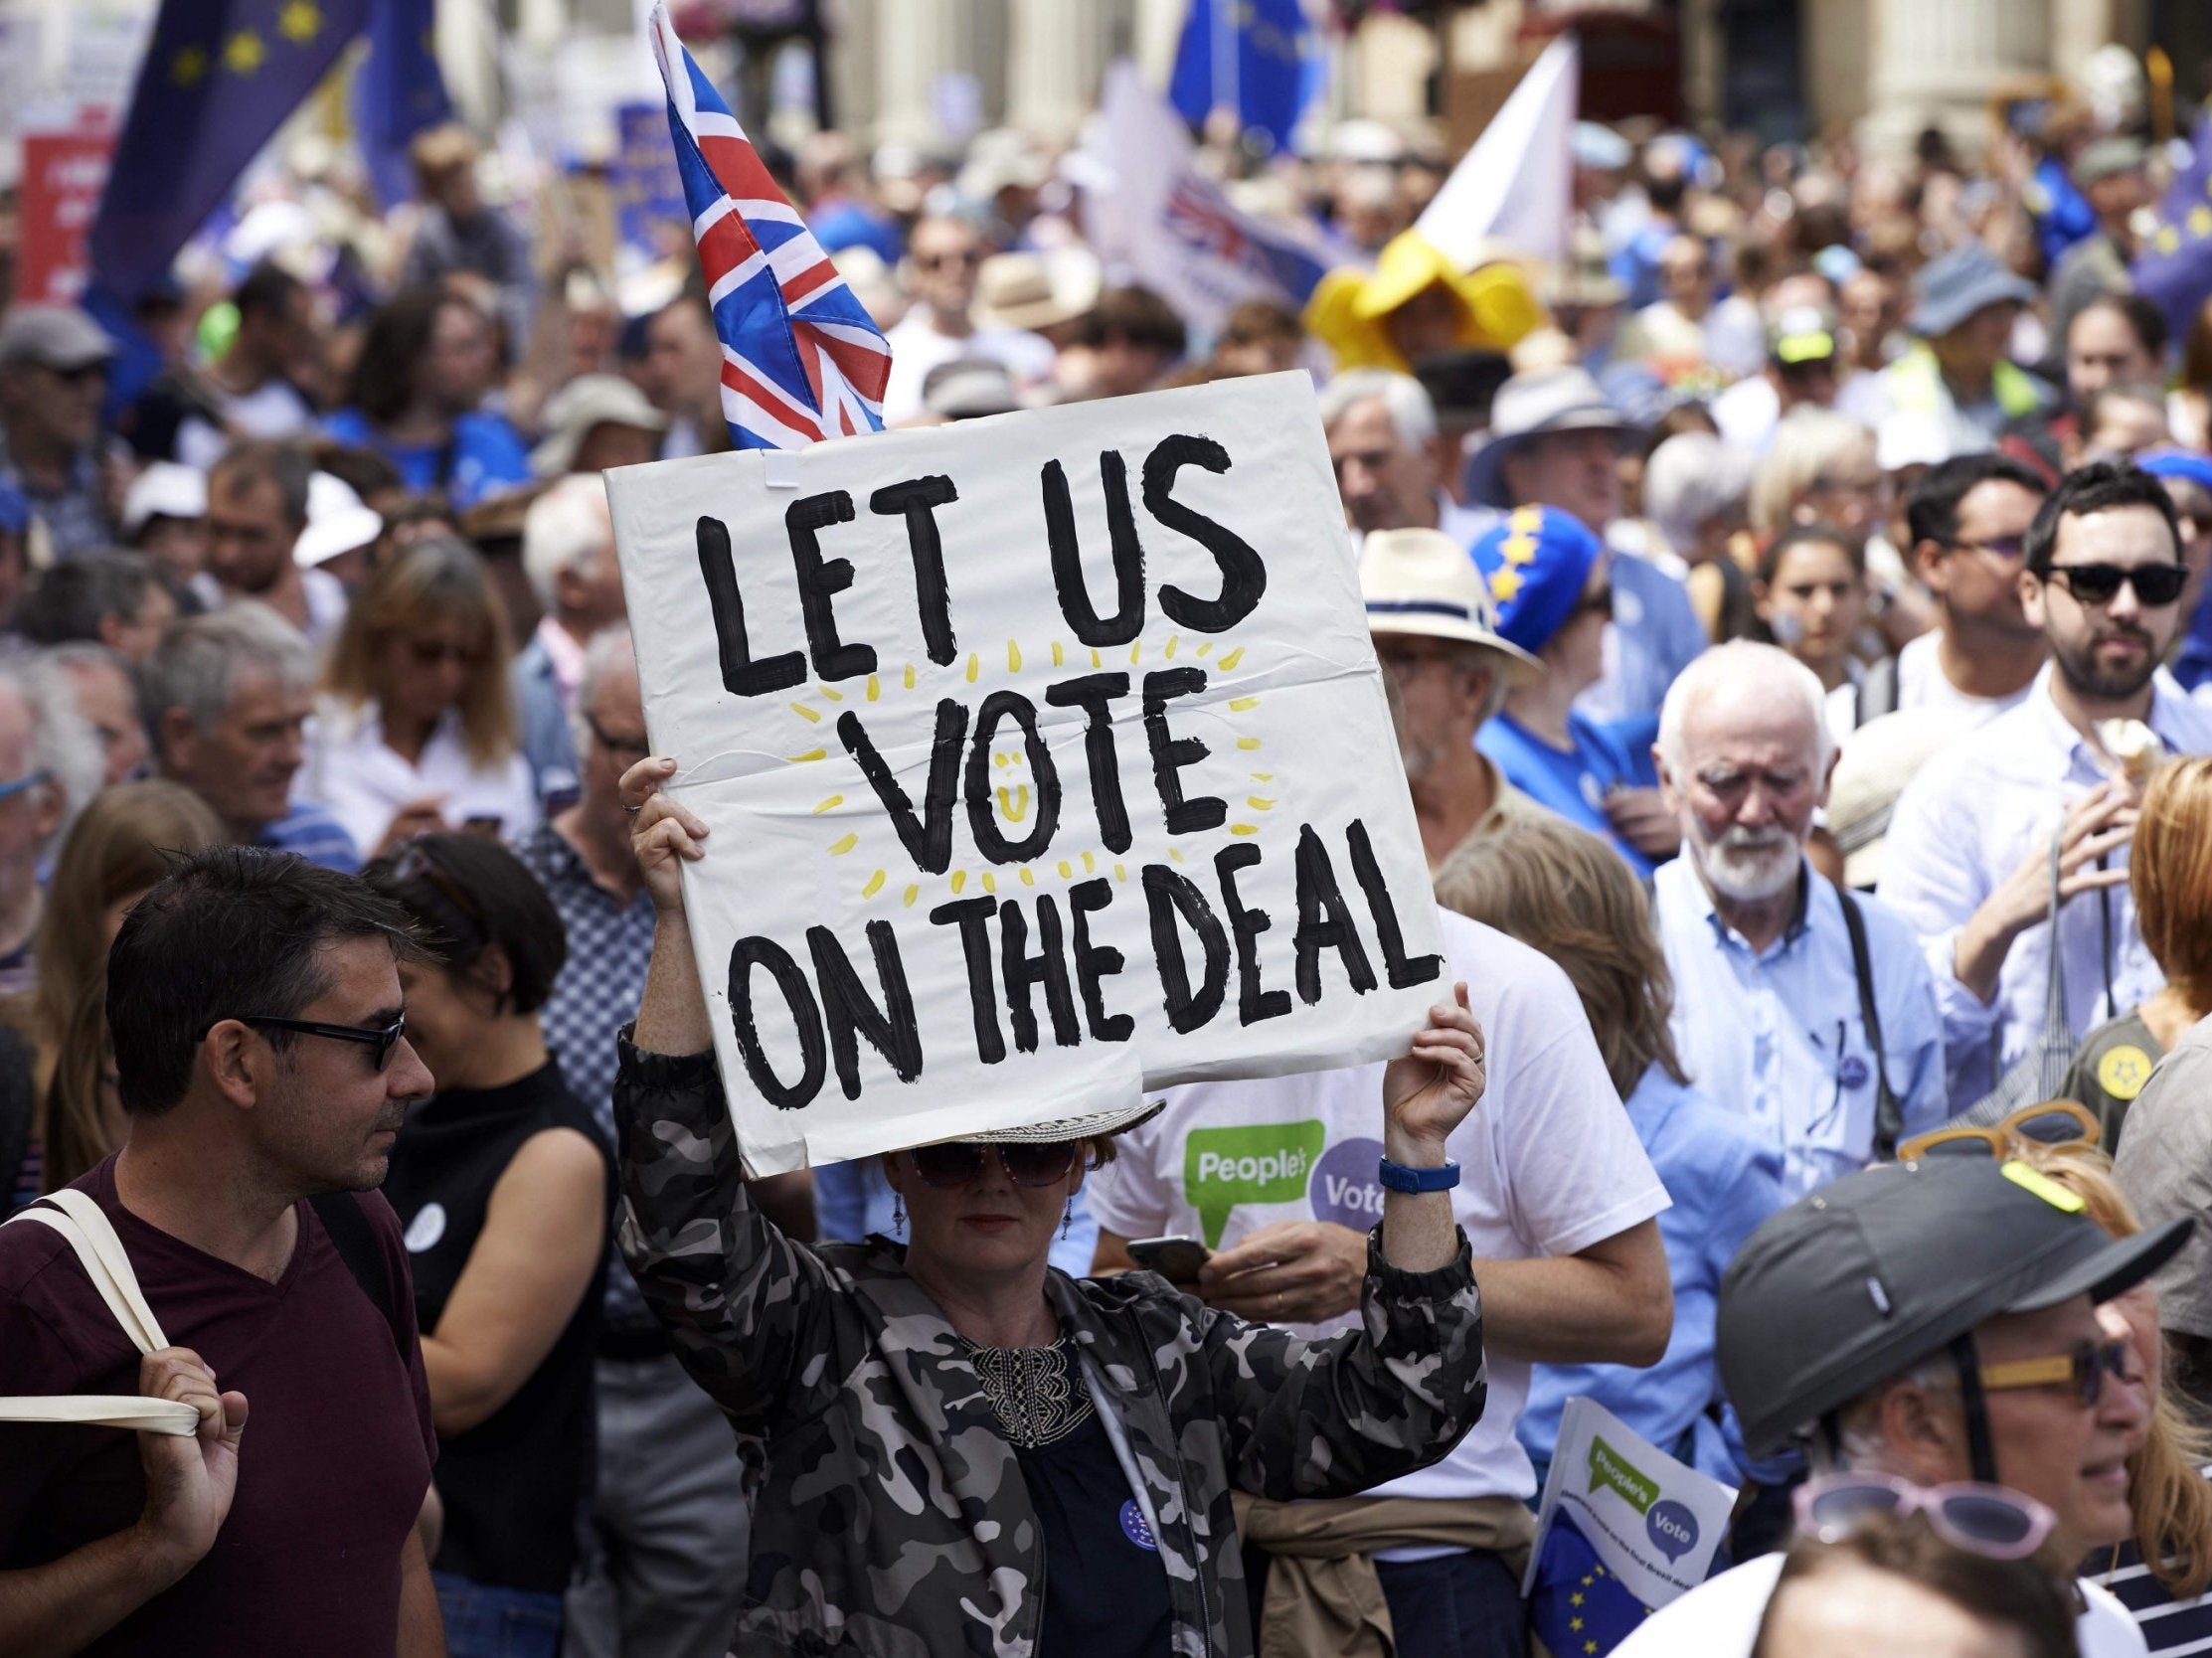 Demonstrators carry banners and flags as they participate in a march calling for a Final Say on the Brexit deal